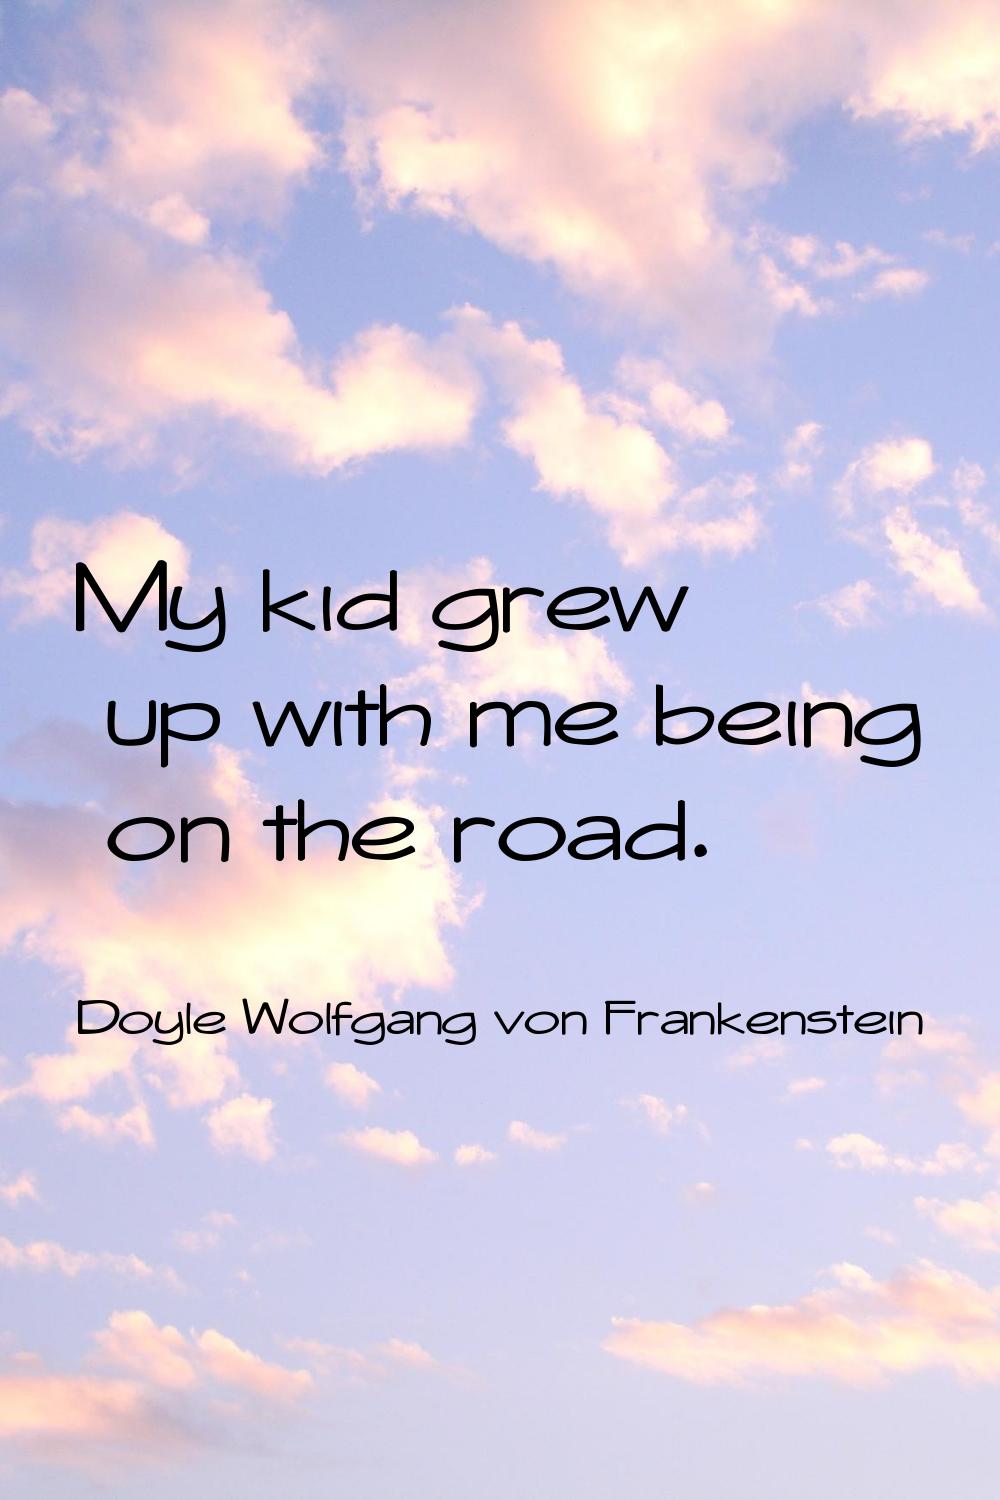 My kid grew up with me being on the road.